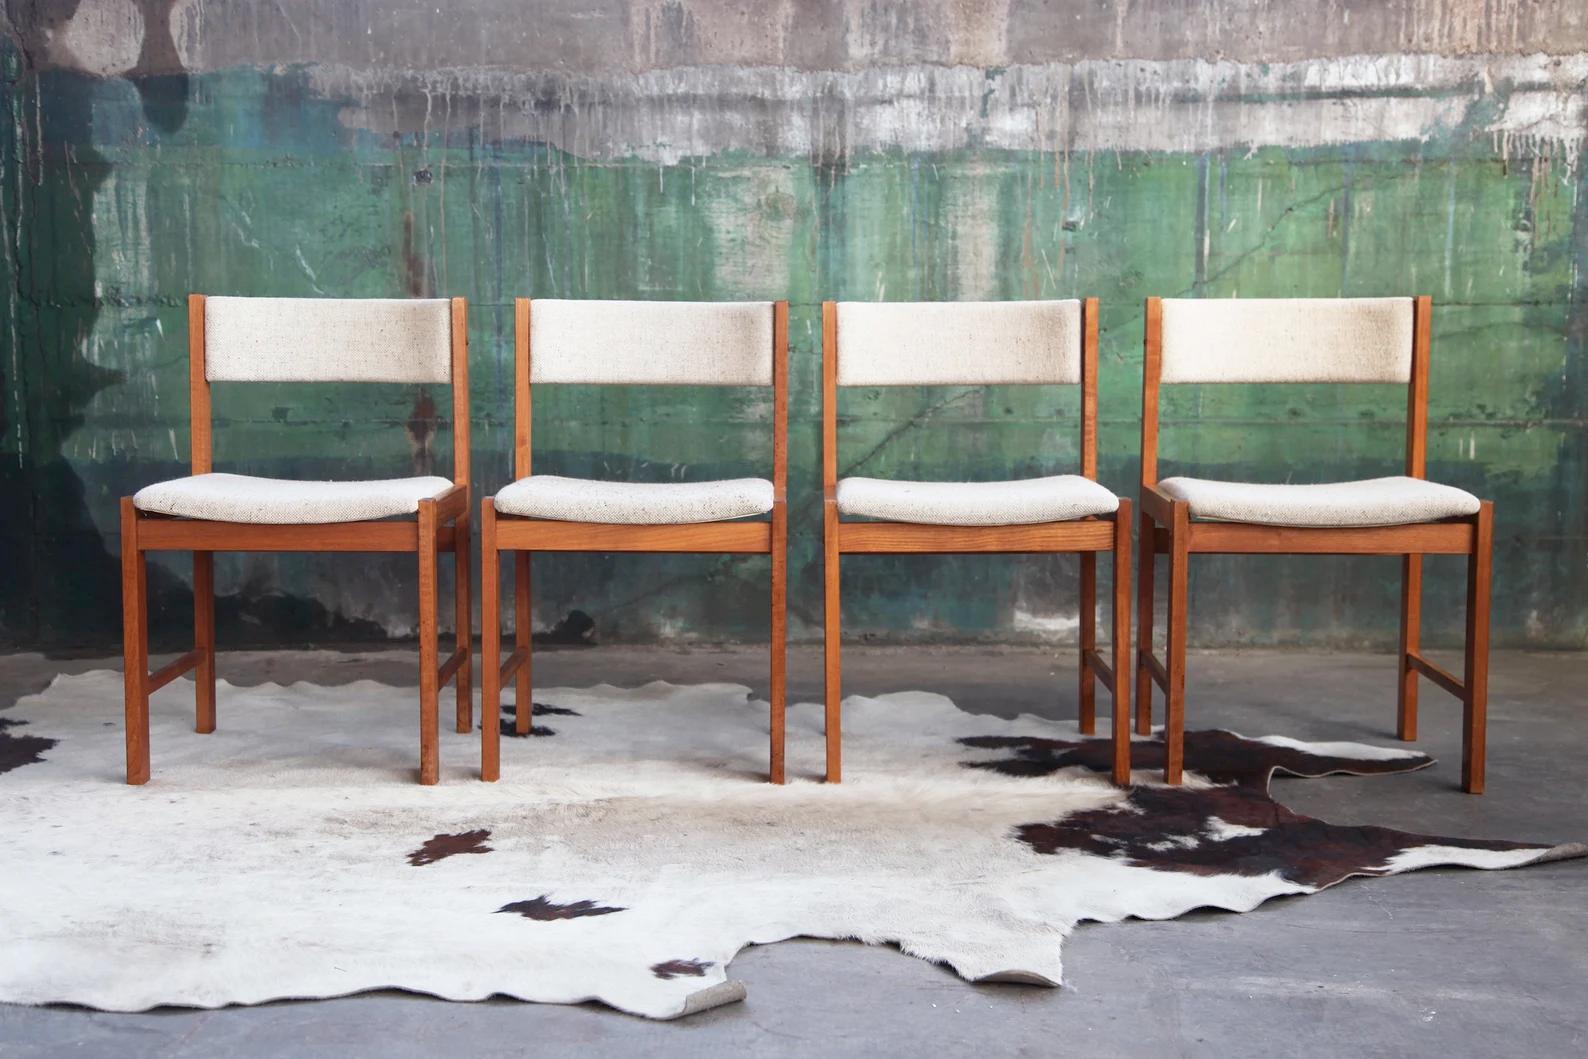 Here is a rare opportunity to purchase a beautiful, classic, sturdy and beautifully made set of four solid wood teak Danish chairs. They are highly collectible, iconic, and very stylish Mid Century Teak dining chairs by DScan, upholstered with